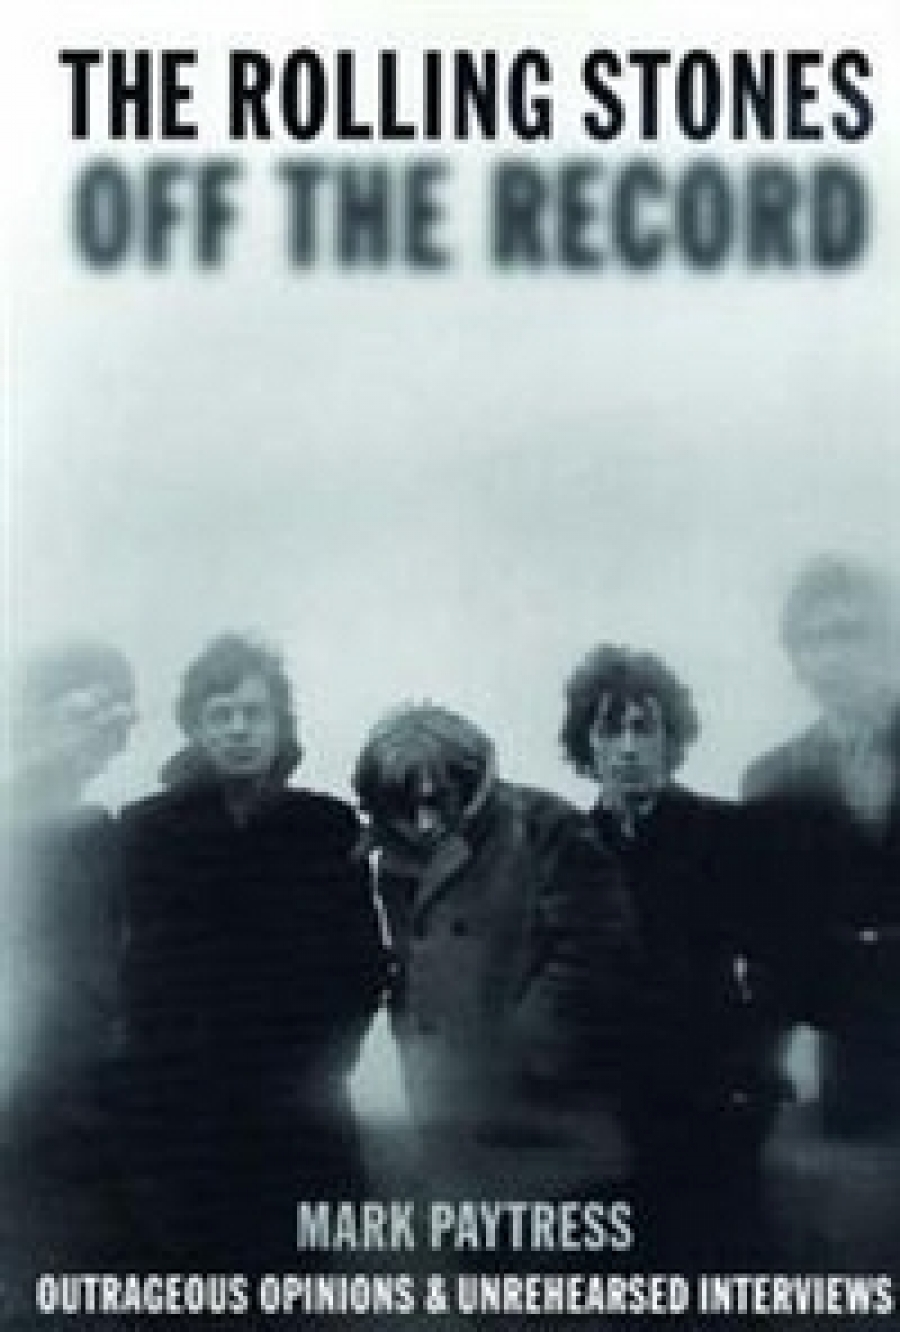 Mark P. The Rolling Stones Off the Record: Outrageous Opinions and Unrehearsed Interviews 